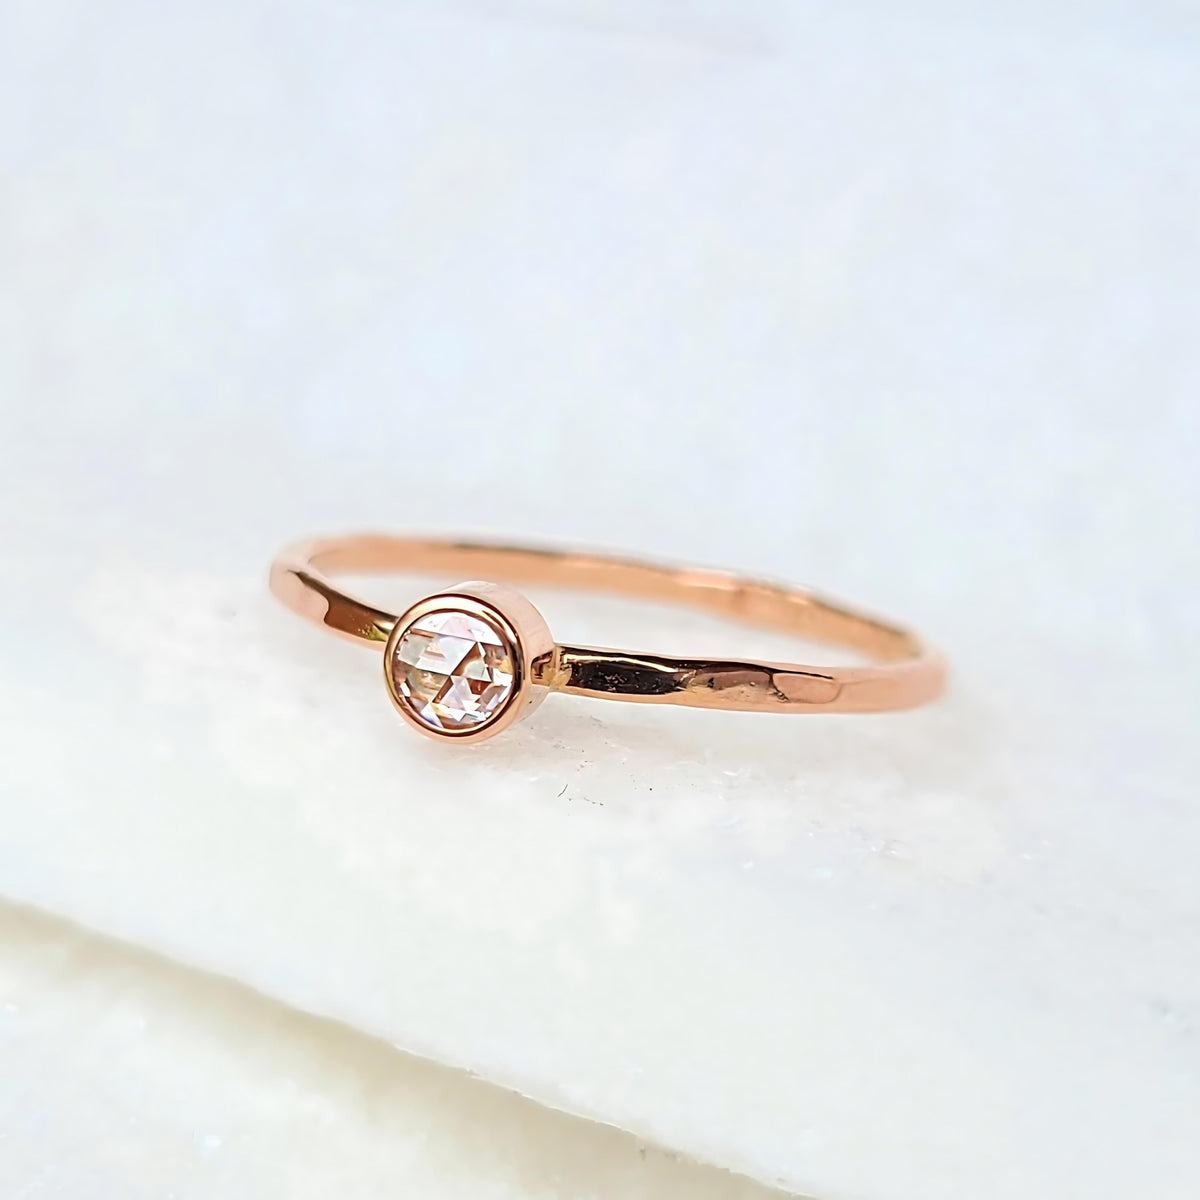 Sincerely Ginger Jewelry 14K Rose Cut White Diamond Stacking Ring in Rose Gold